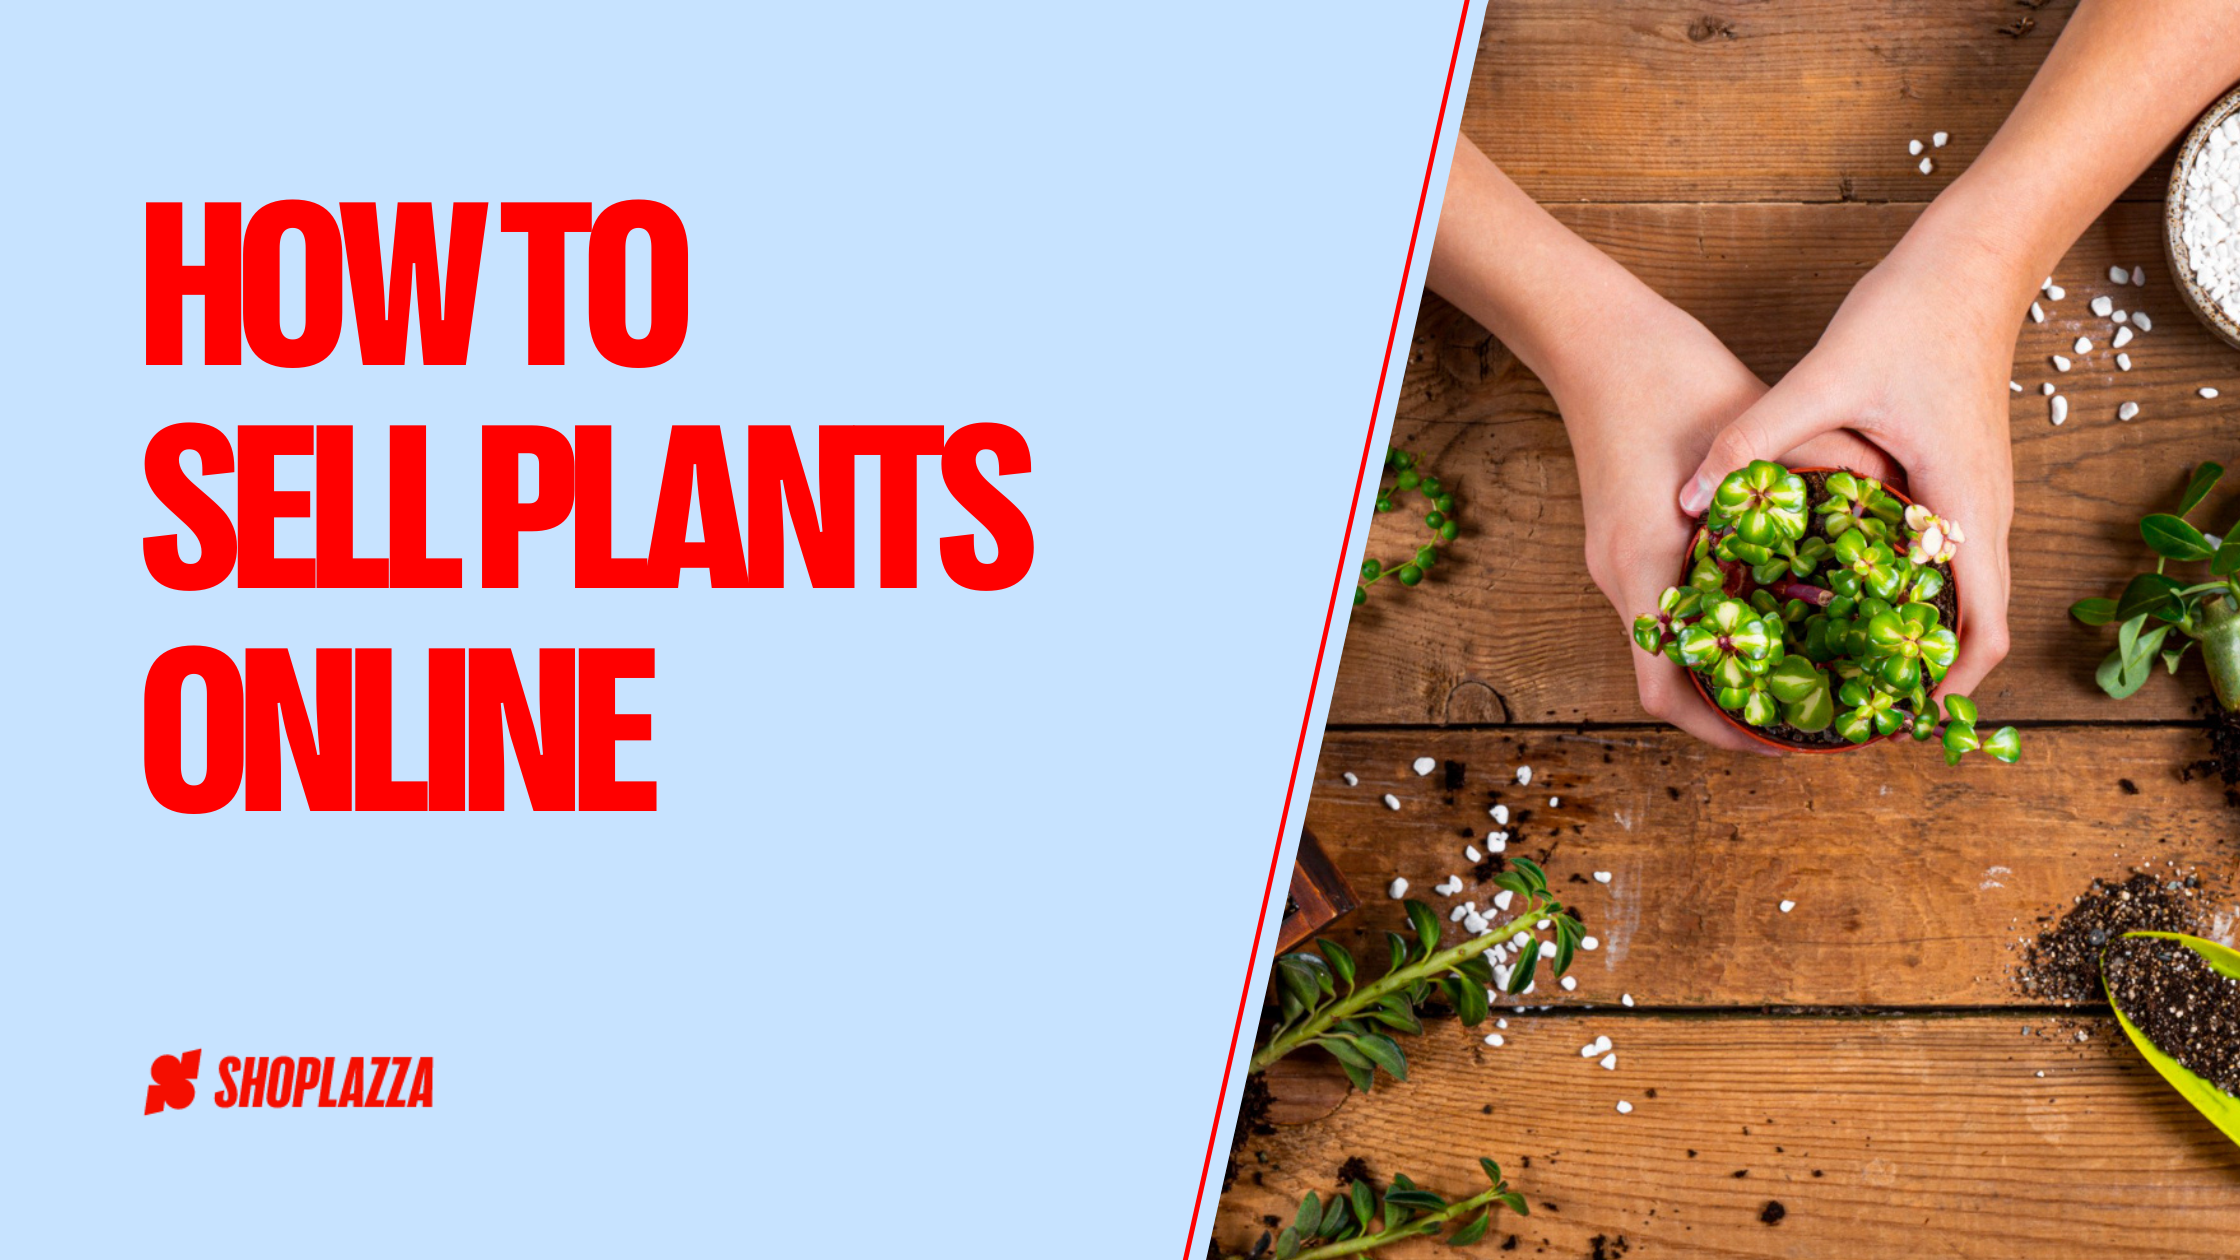 Cover image shows the title of the blog post, How to Sell Plants Online, and the Shoplazza logo on the left. On the right, there's a picture of a person over a wooden table, holding a potted plant.